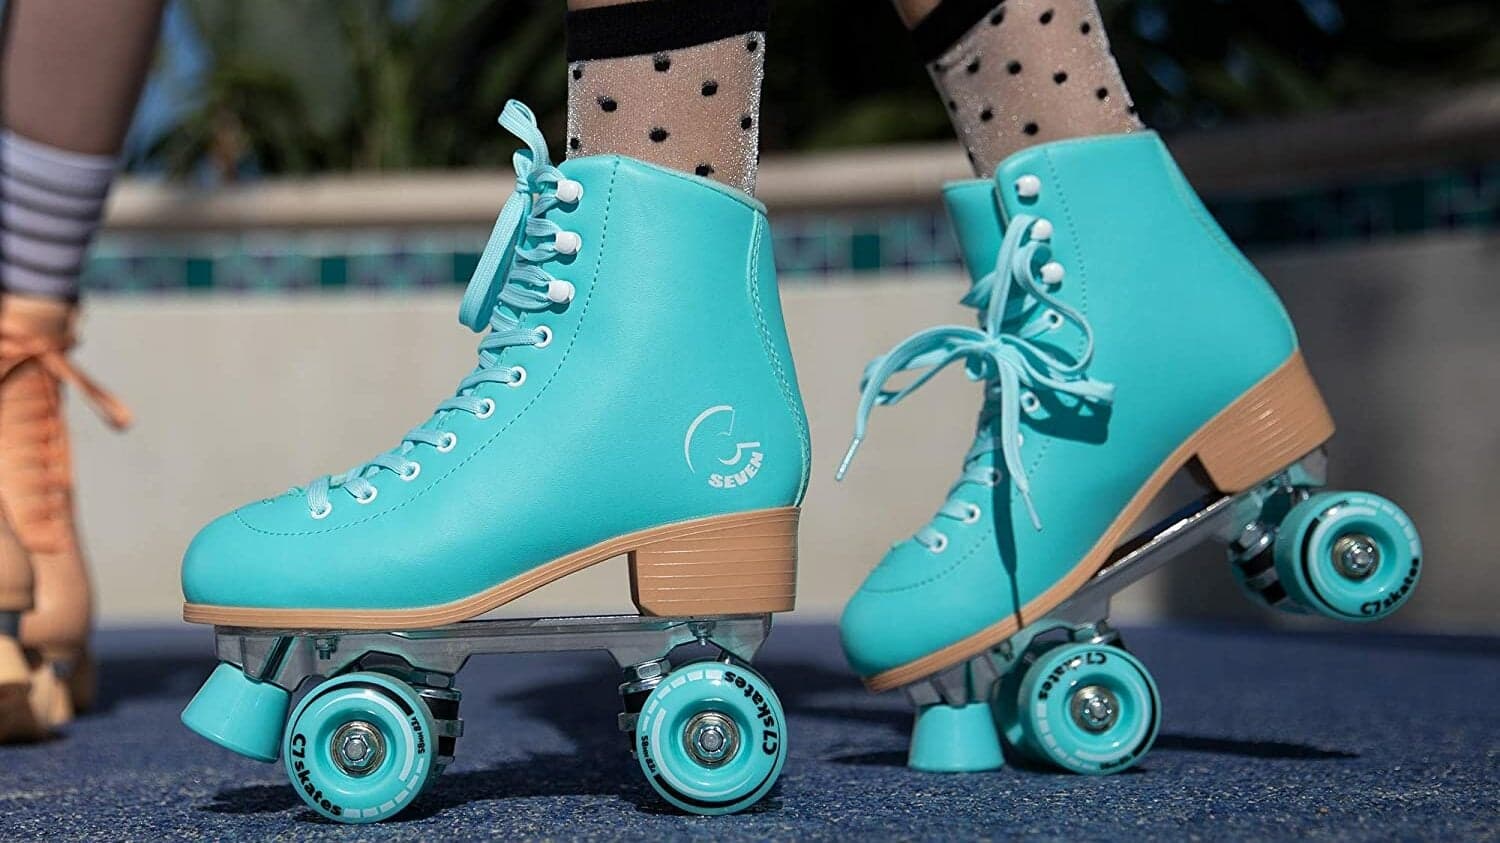 The Best Roller Skates For Women (Review & Buying Guide) in 2022